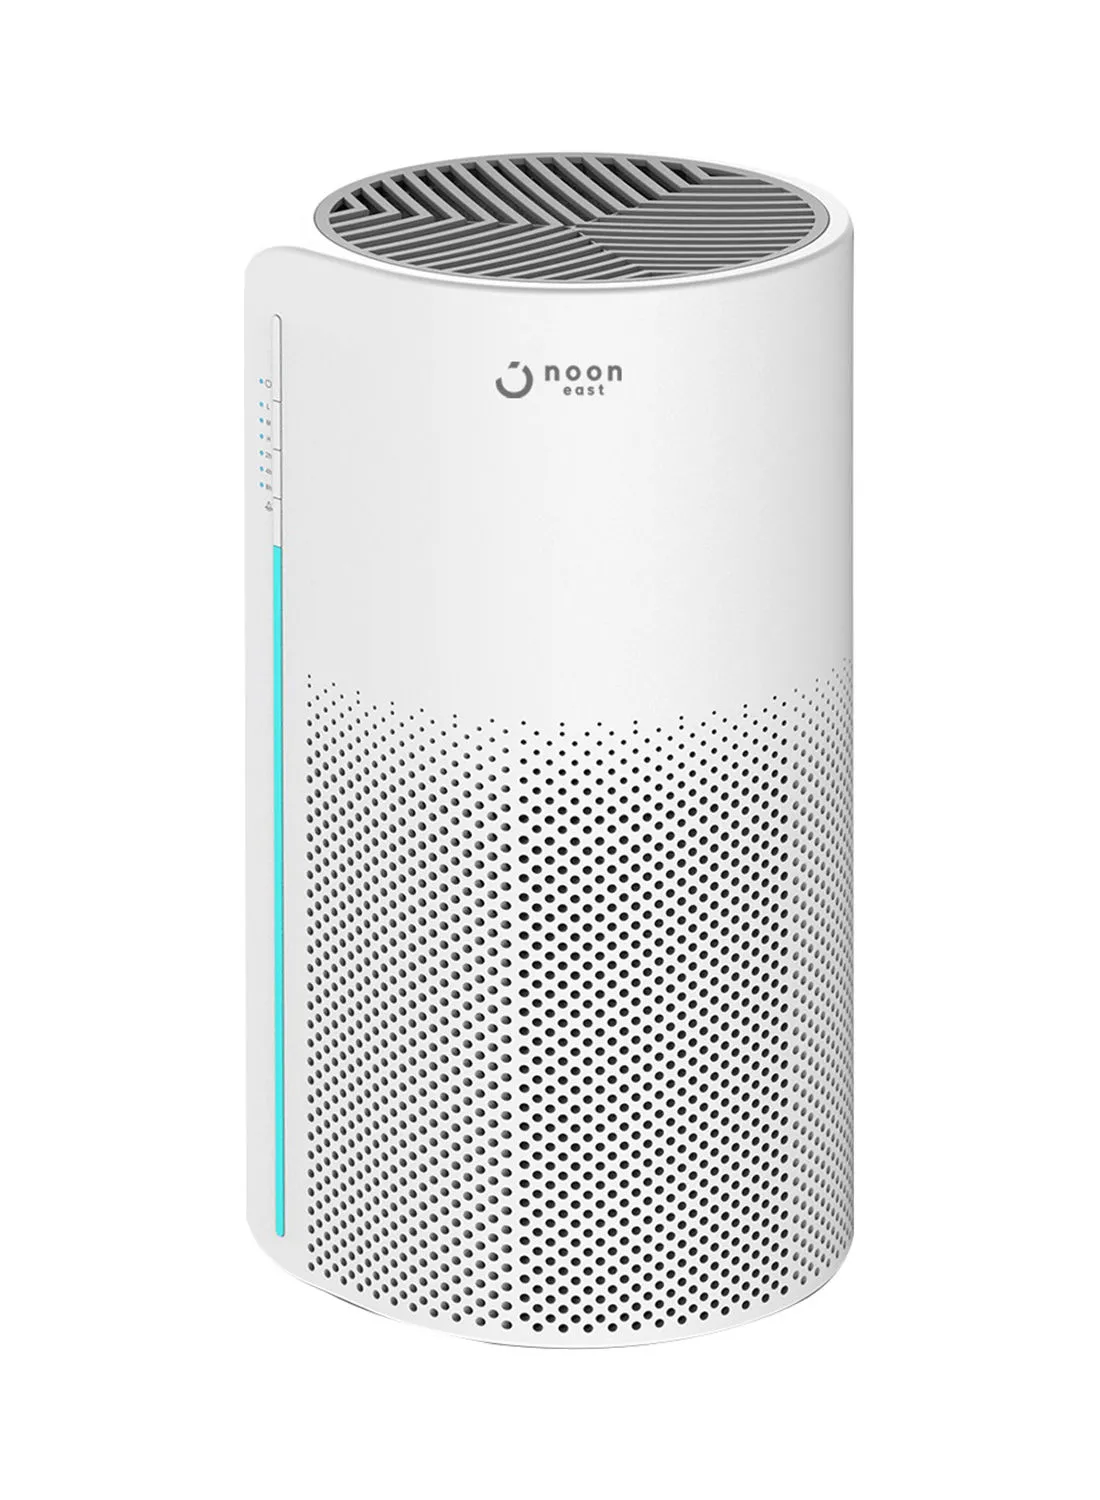 noon east Portable Air Purifier For Home- 130 CADR- 200 Square Feet Coverage With HEPA H13, Activate Carbon And Easy Filter Replacement Miro Miro Pearl White